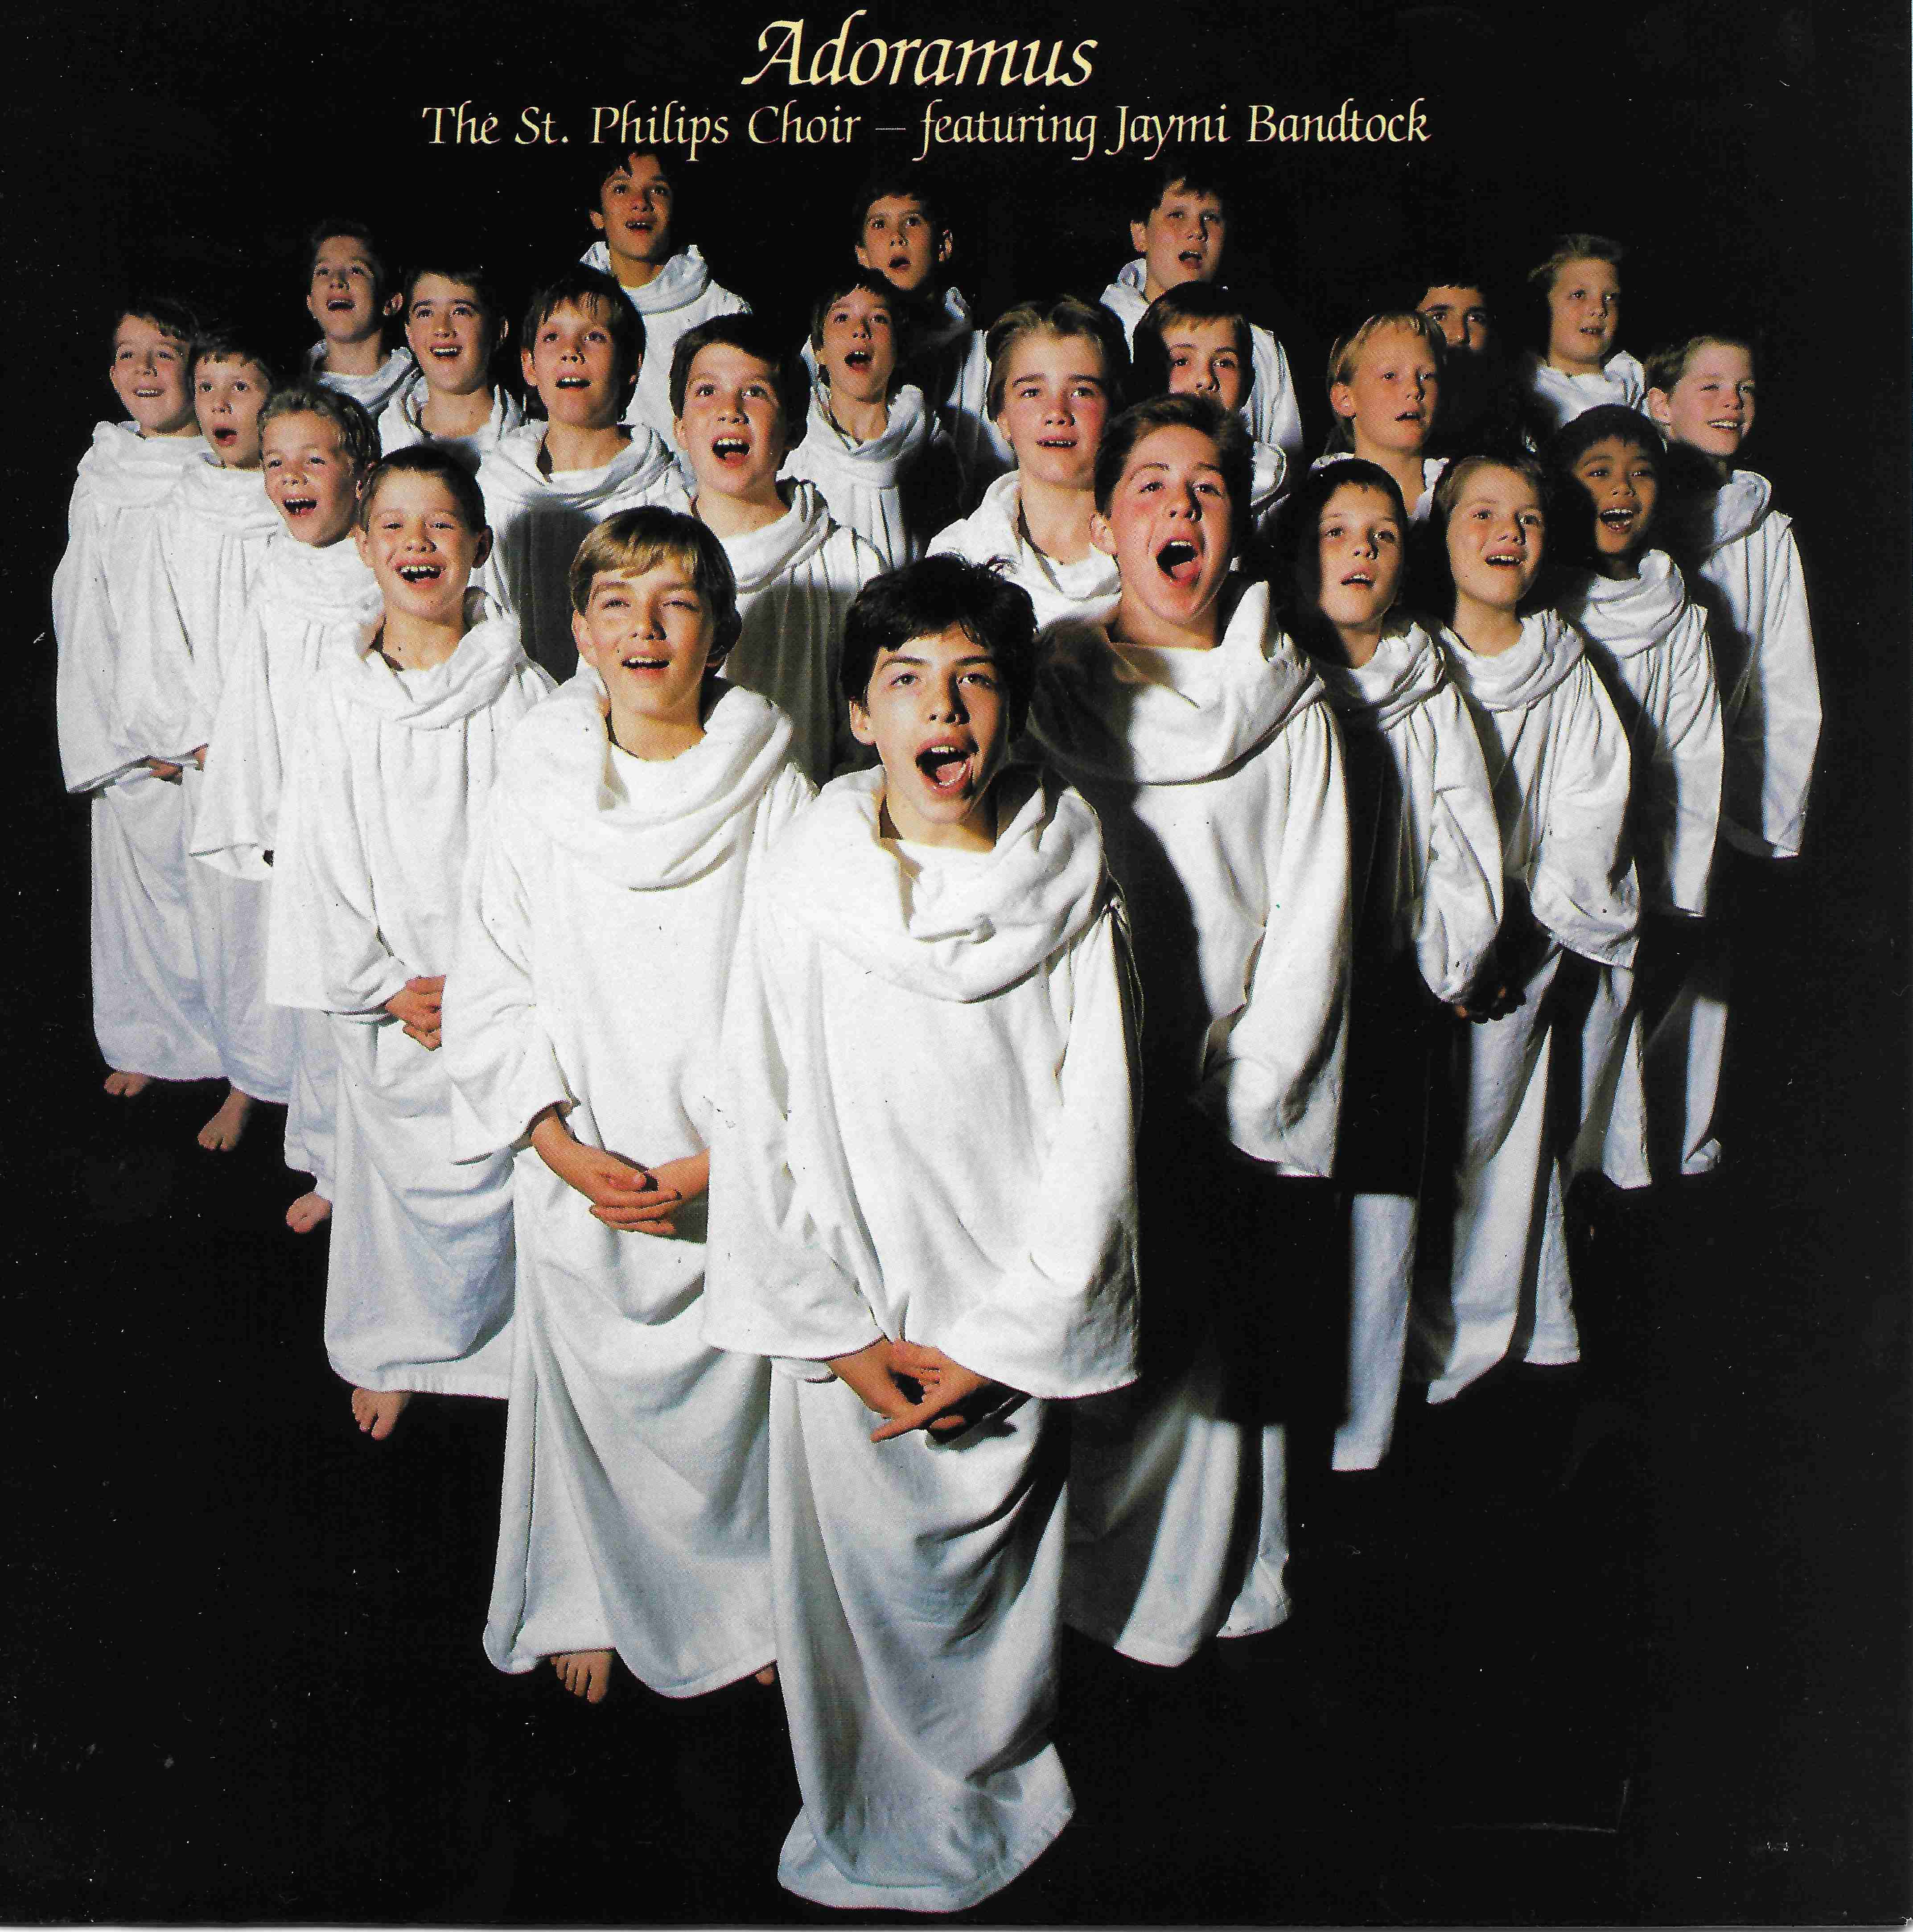 Picture of RESL 230 Adoramus by artist The St. Philips Choir / Jamyl Bandtock from the BBC records and Tapes library